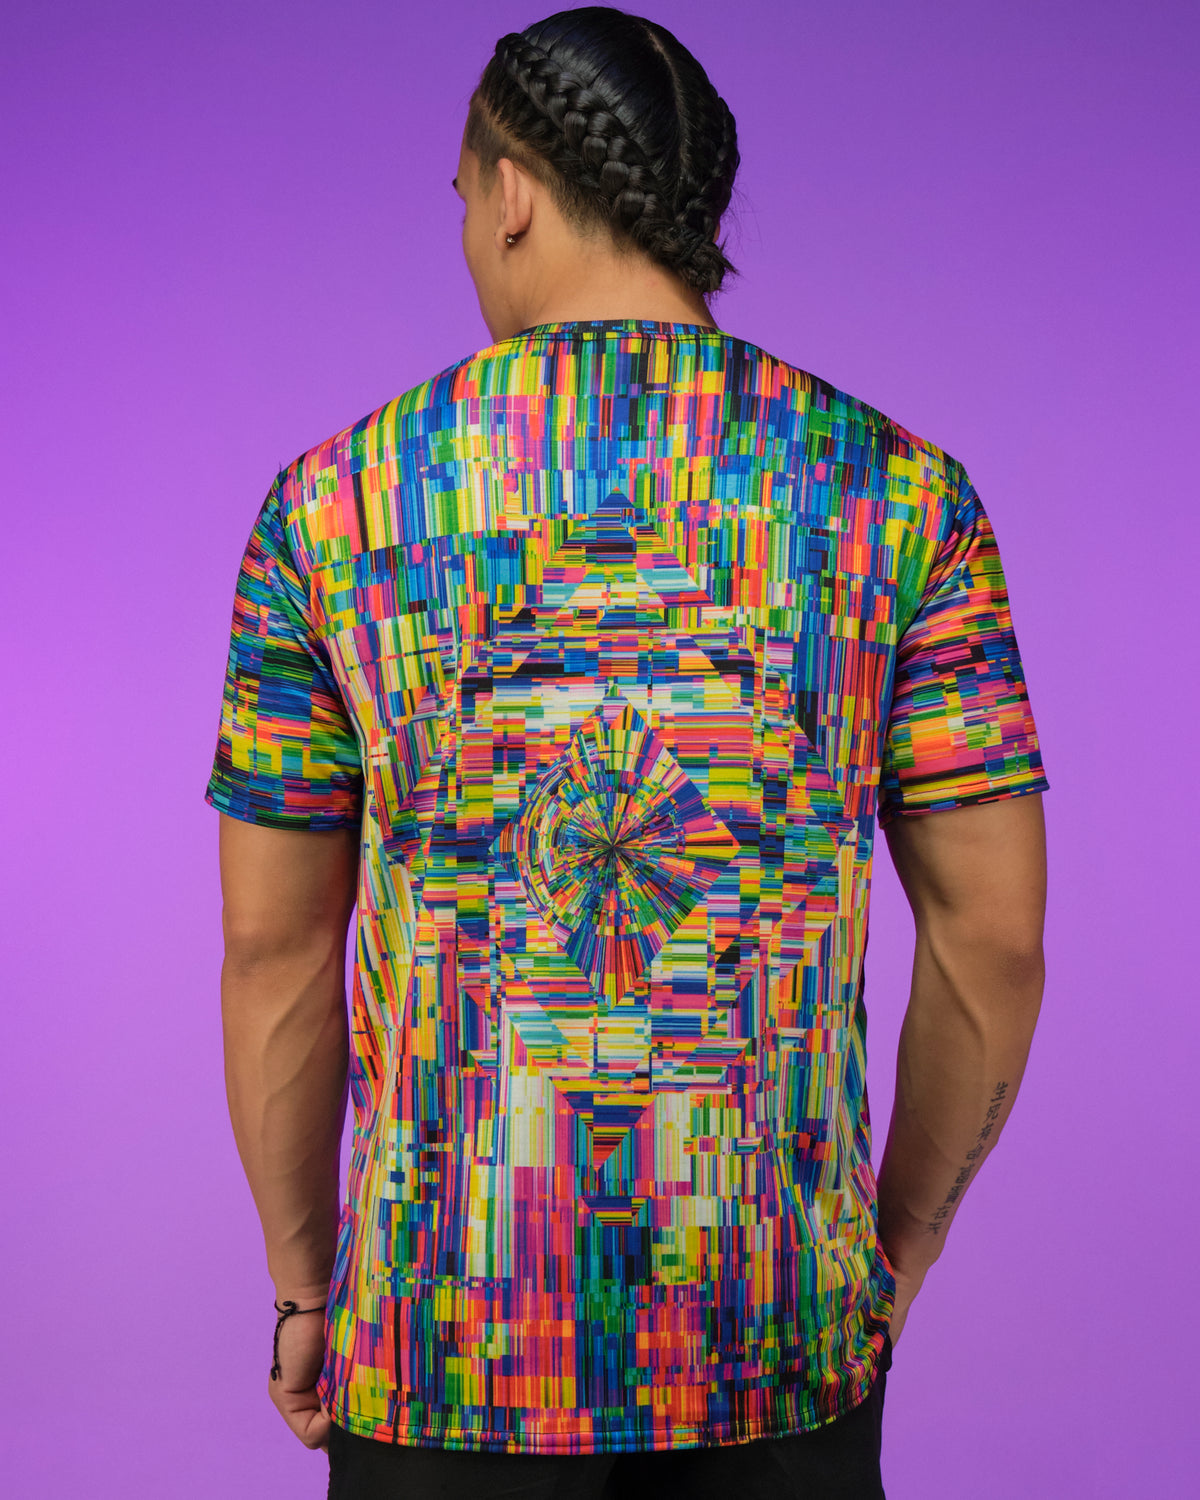 ABSTRACT GLITCH T